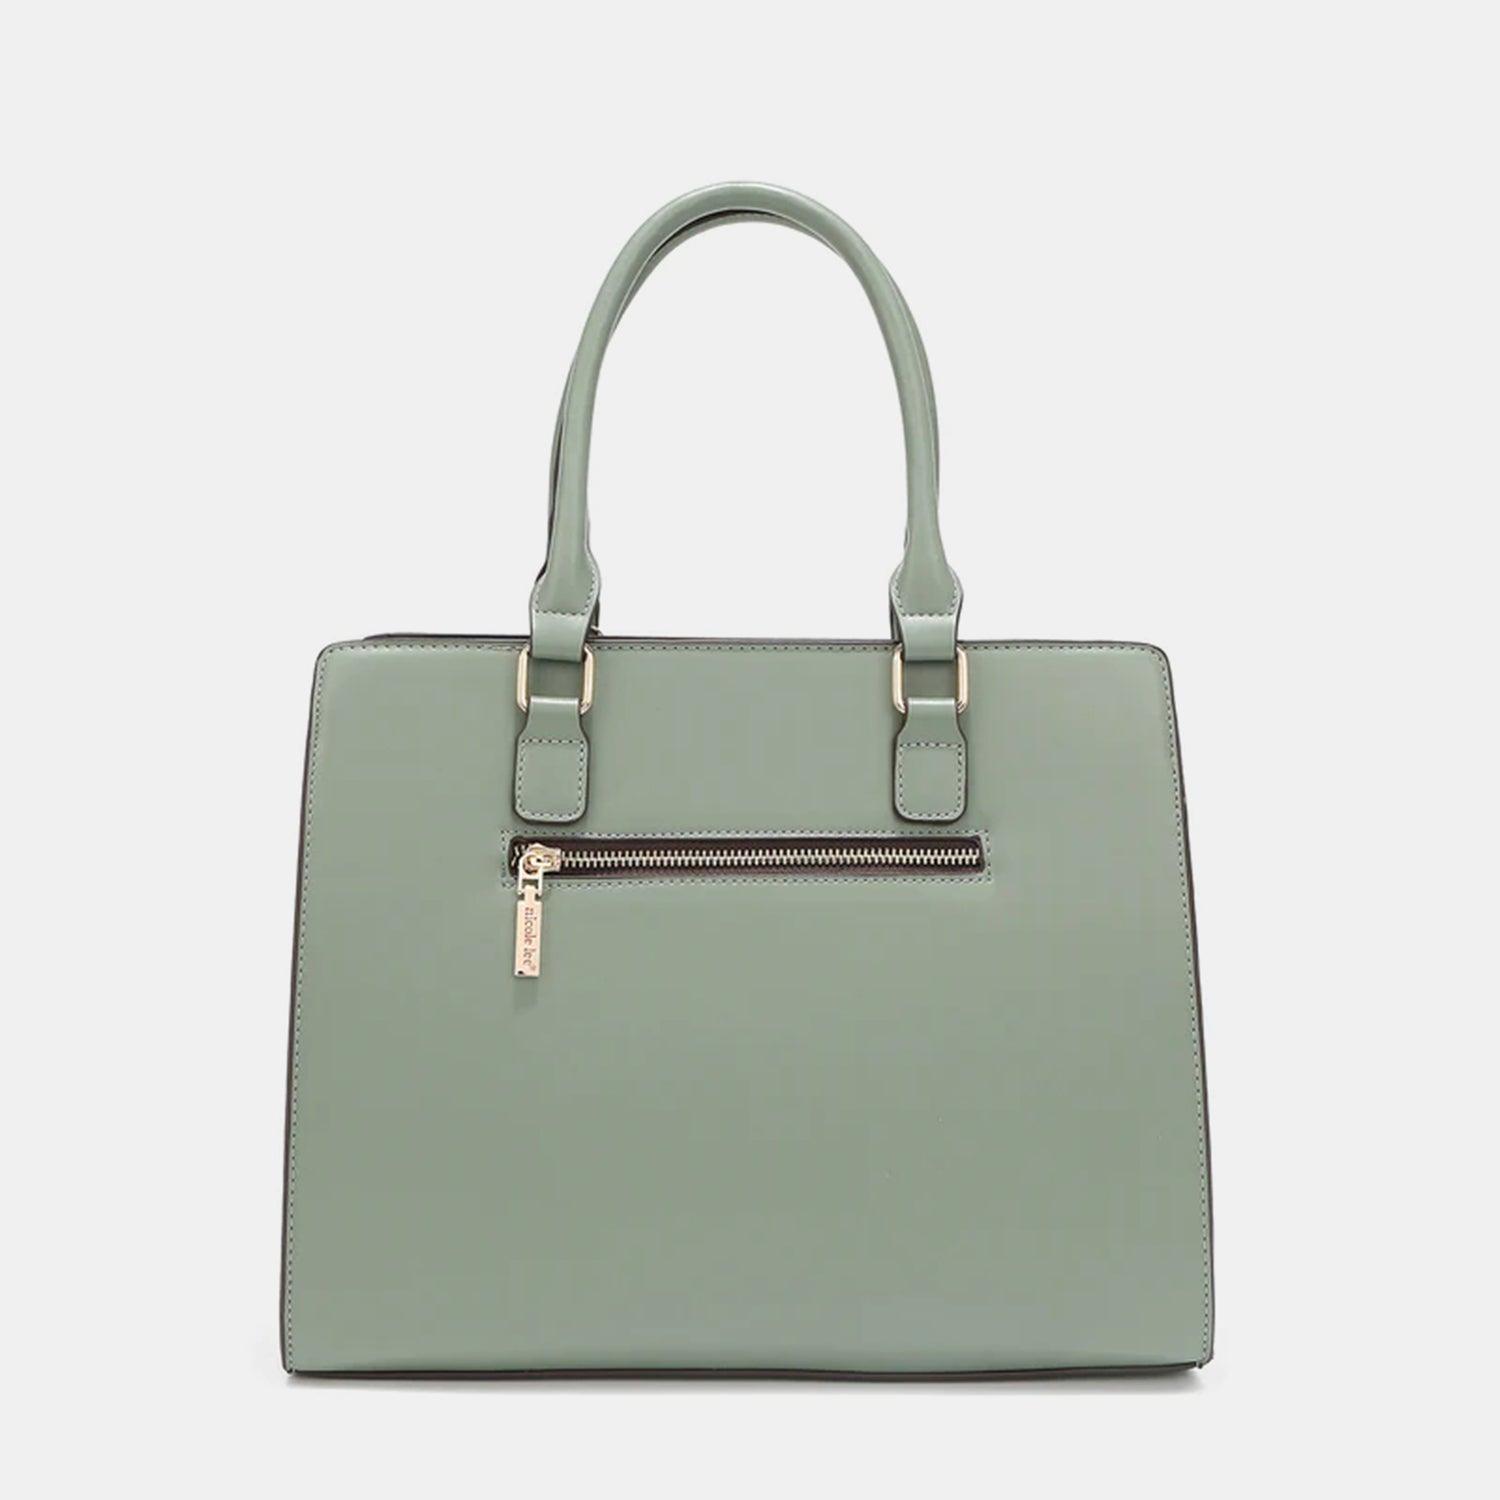 a green handbag with a zipper on the front